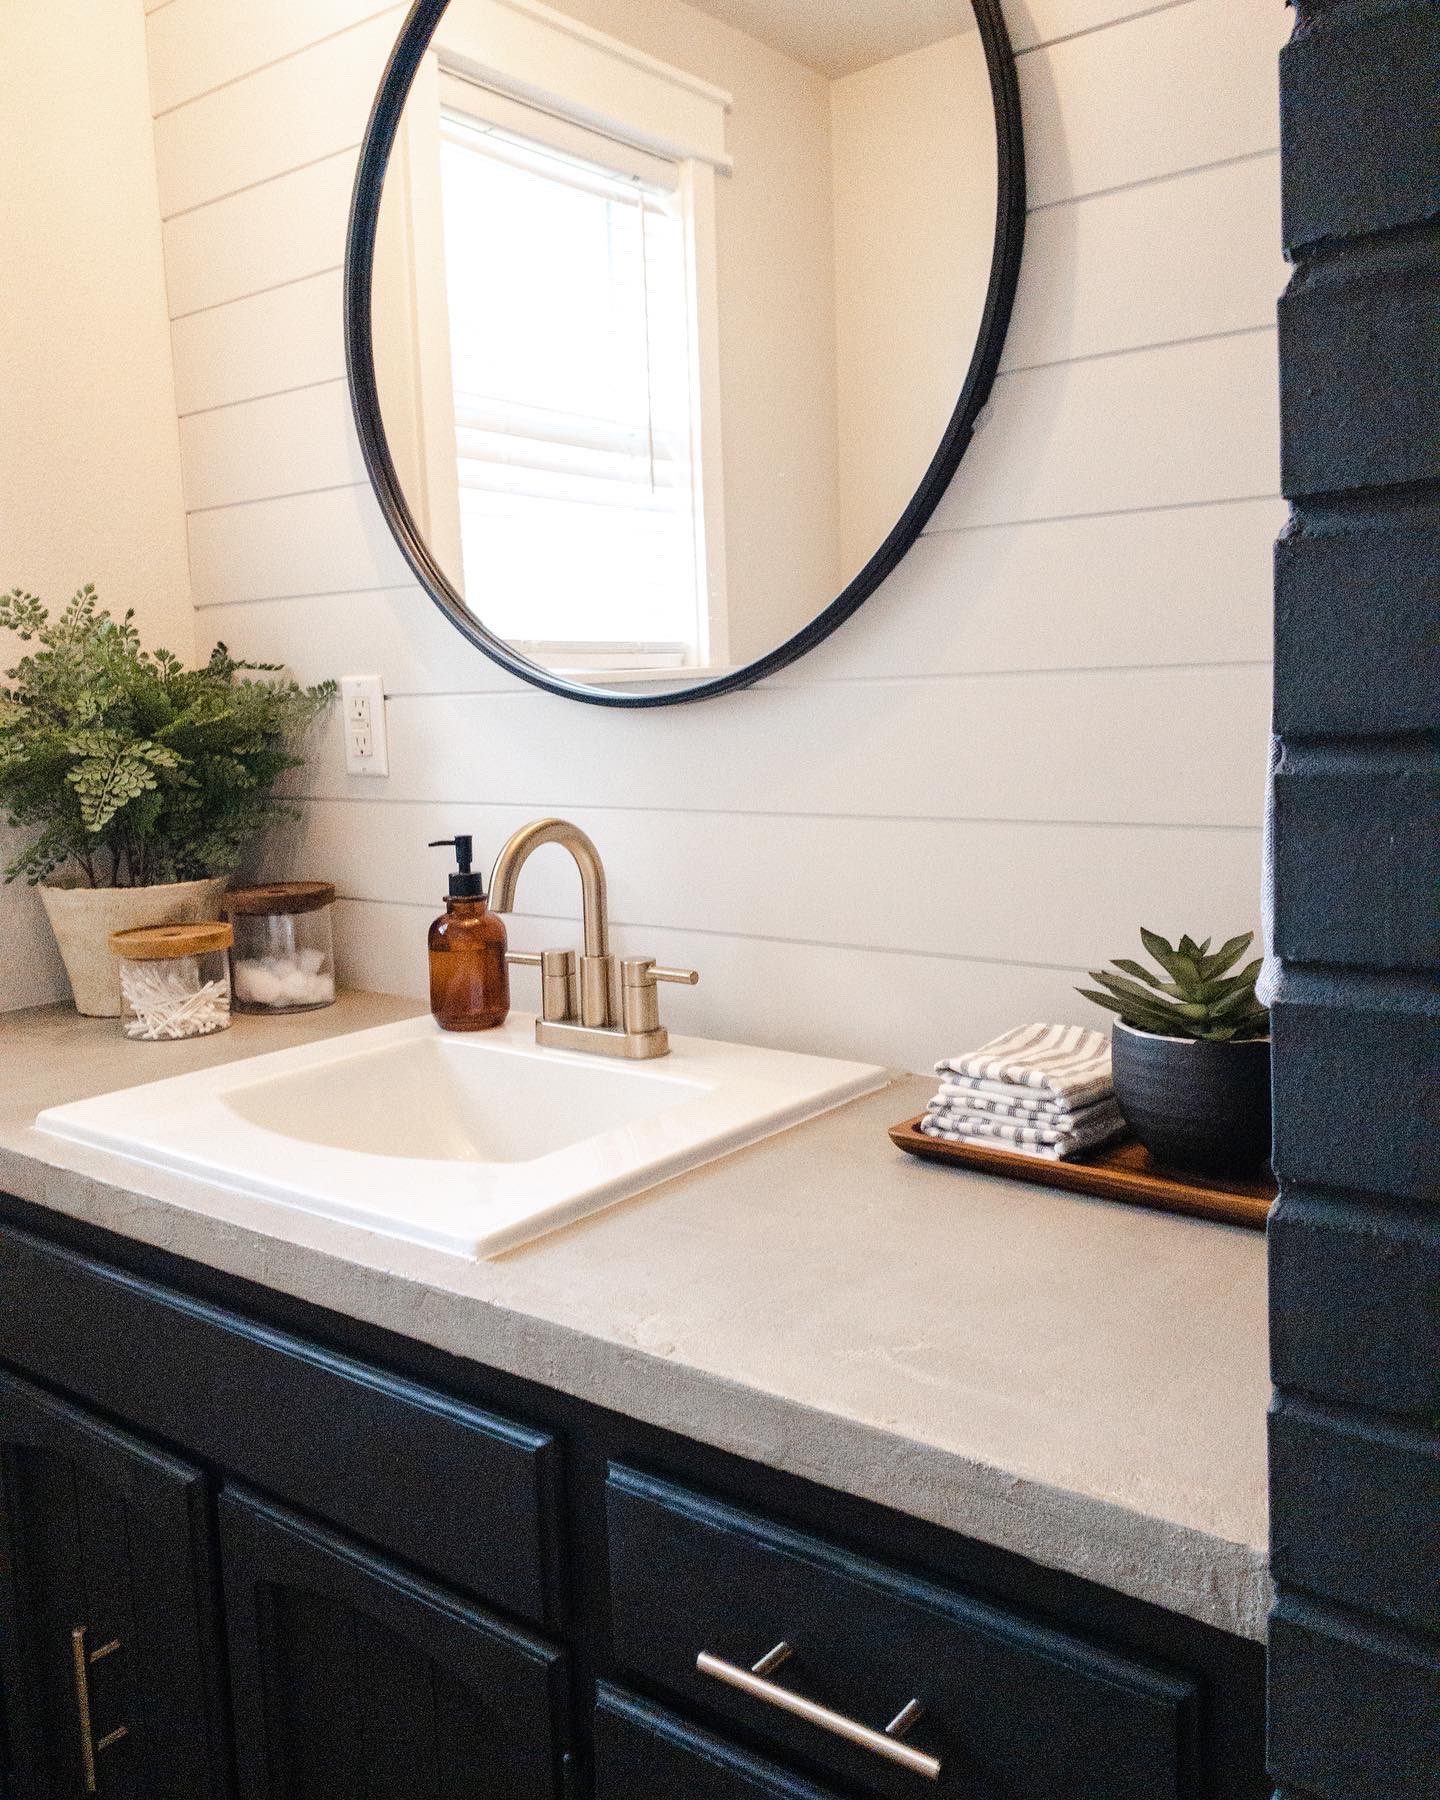 Updated bathroom countertop featuring a sleek and durable Ash Concrete Overlay applied over a Formica surface